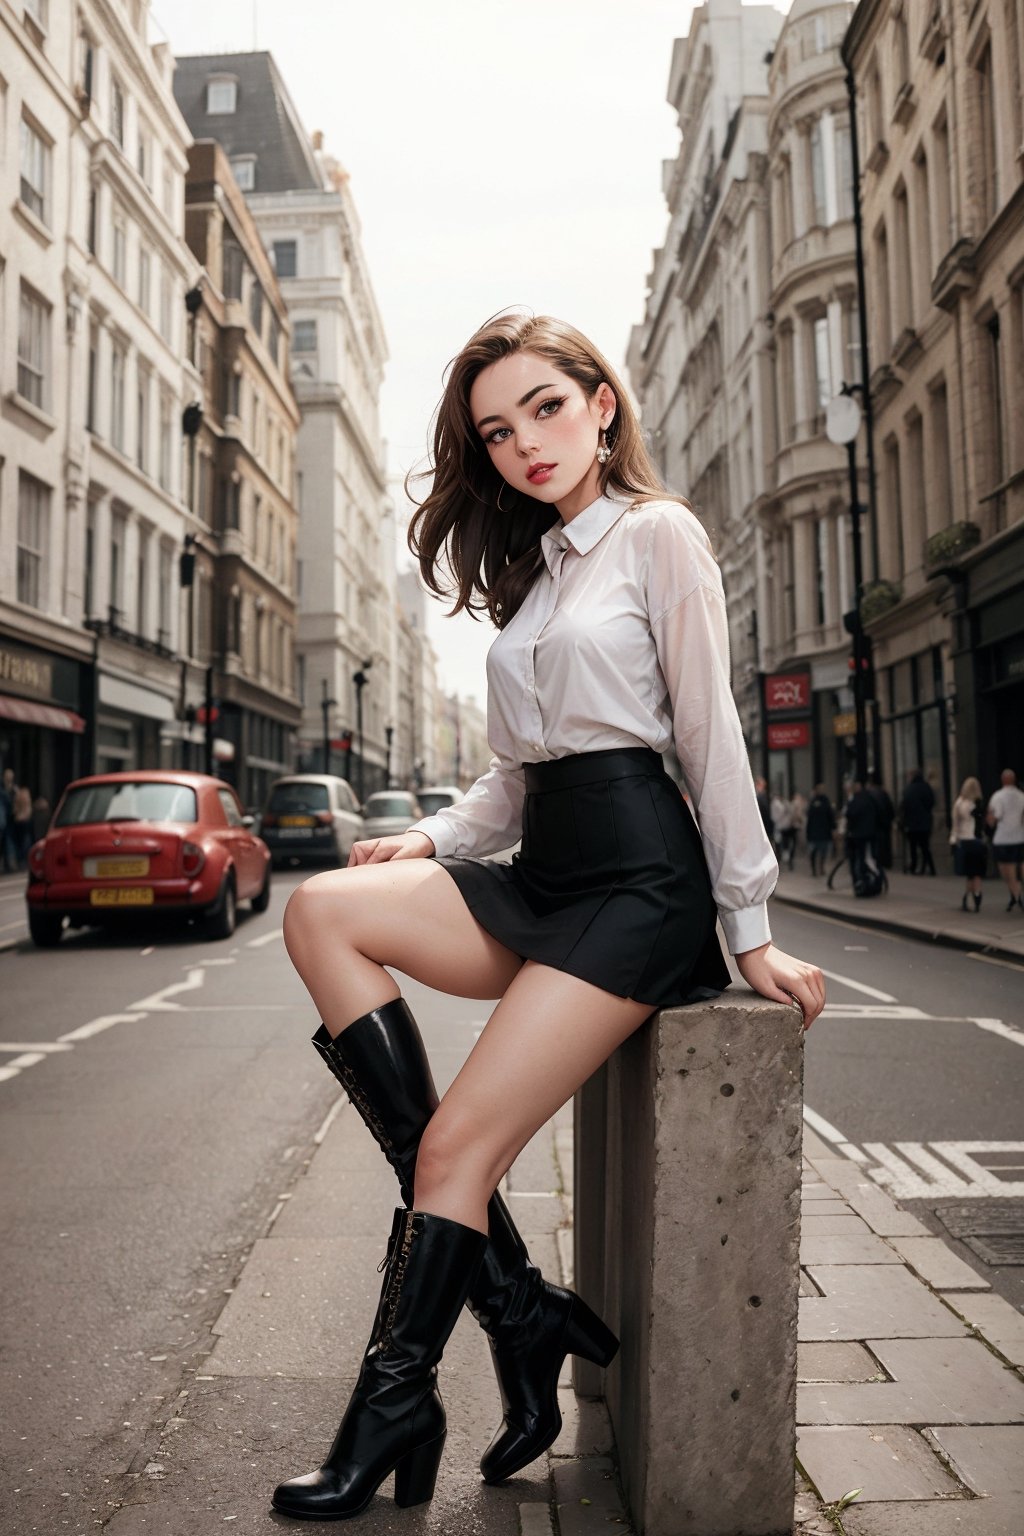 dynamic angle, dynamic shot, perfect face, absolutely beautiful young woman, 1960's, London, gogo boots, mini skirt